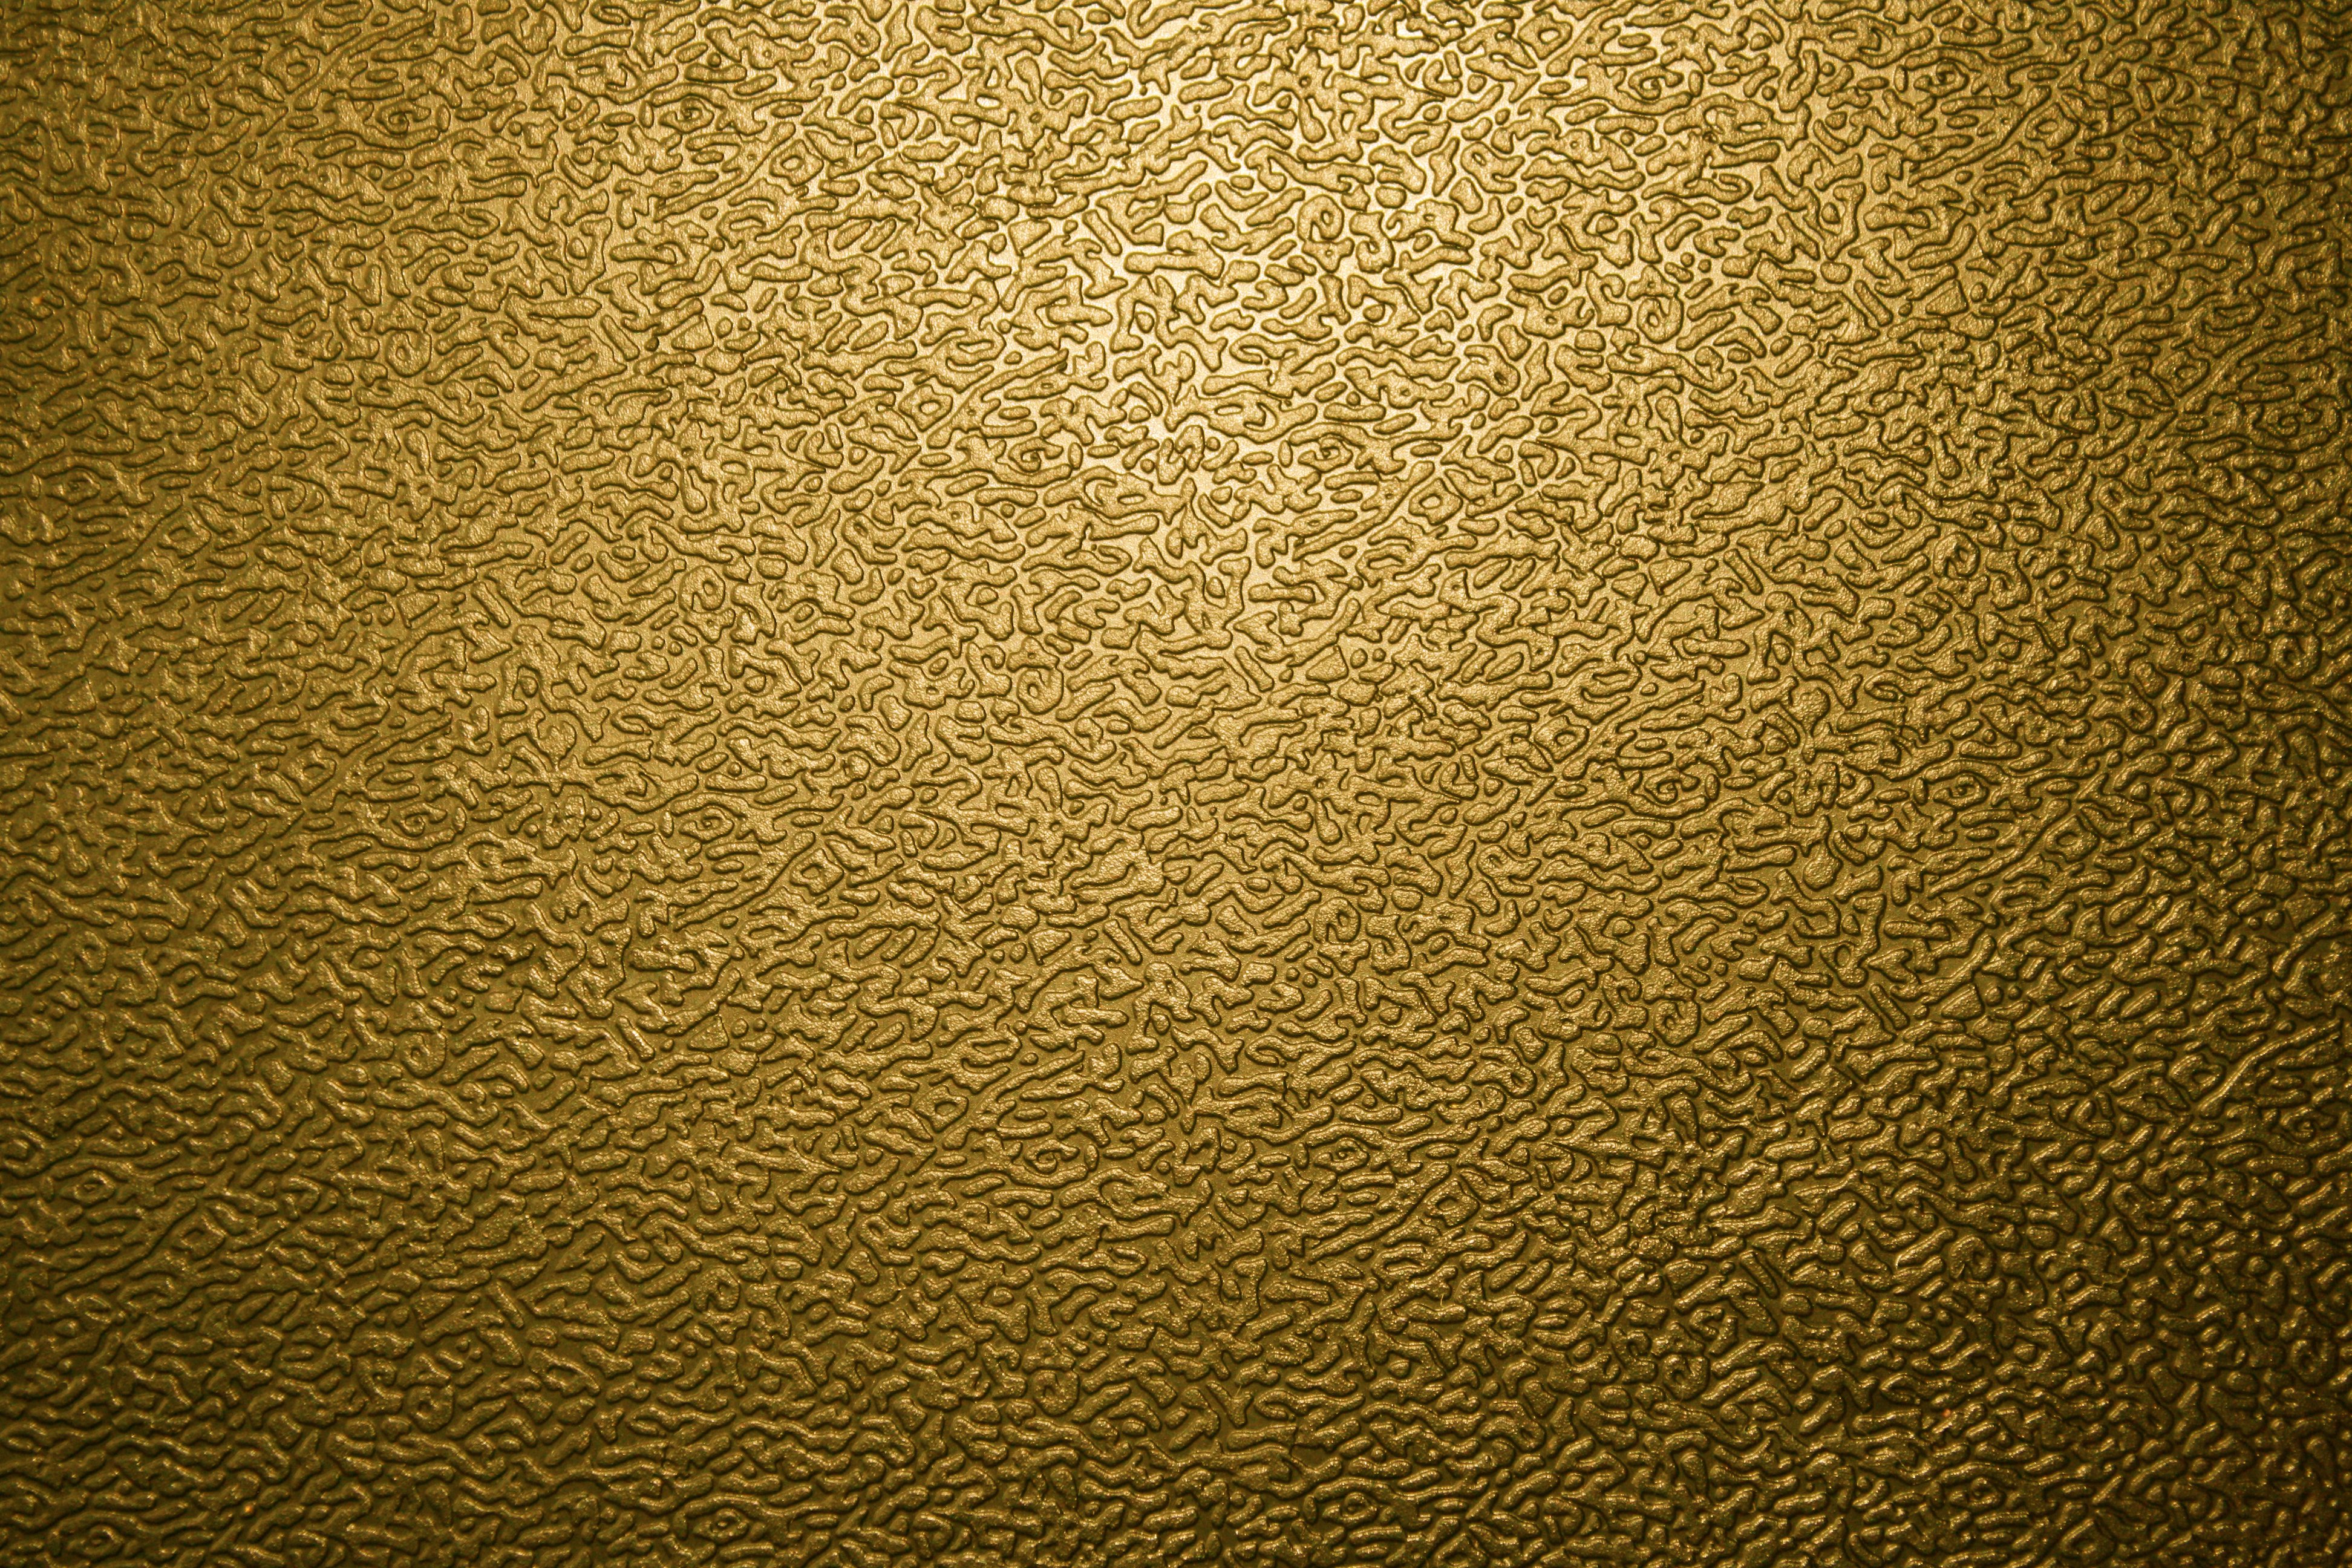 Textured Gold Plastic Close Up Picture Photograph Photos 3888x2592